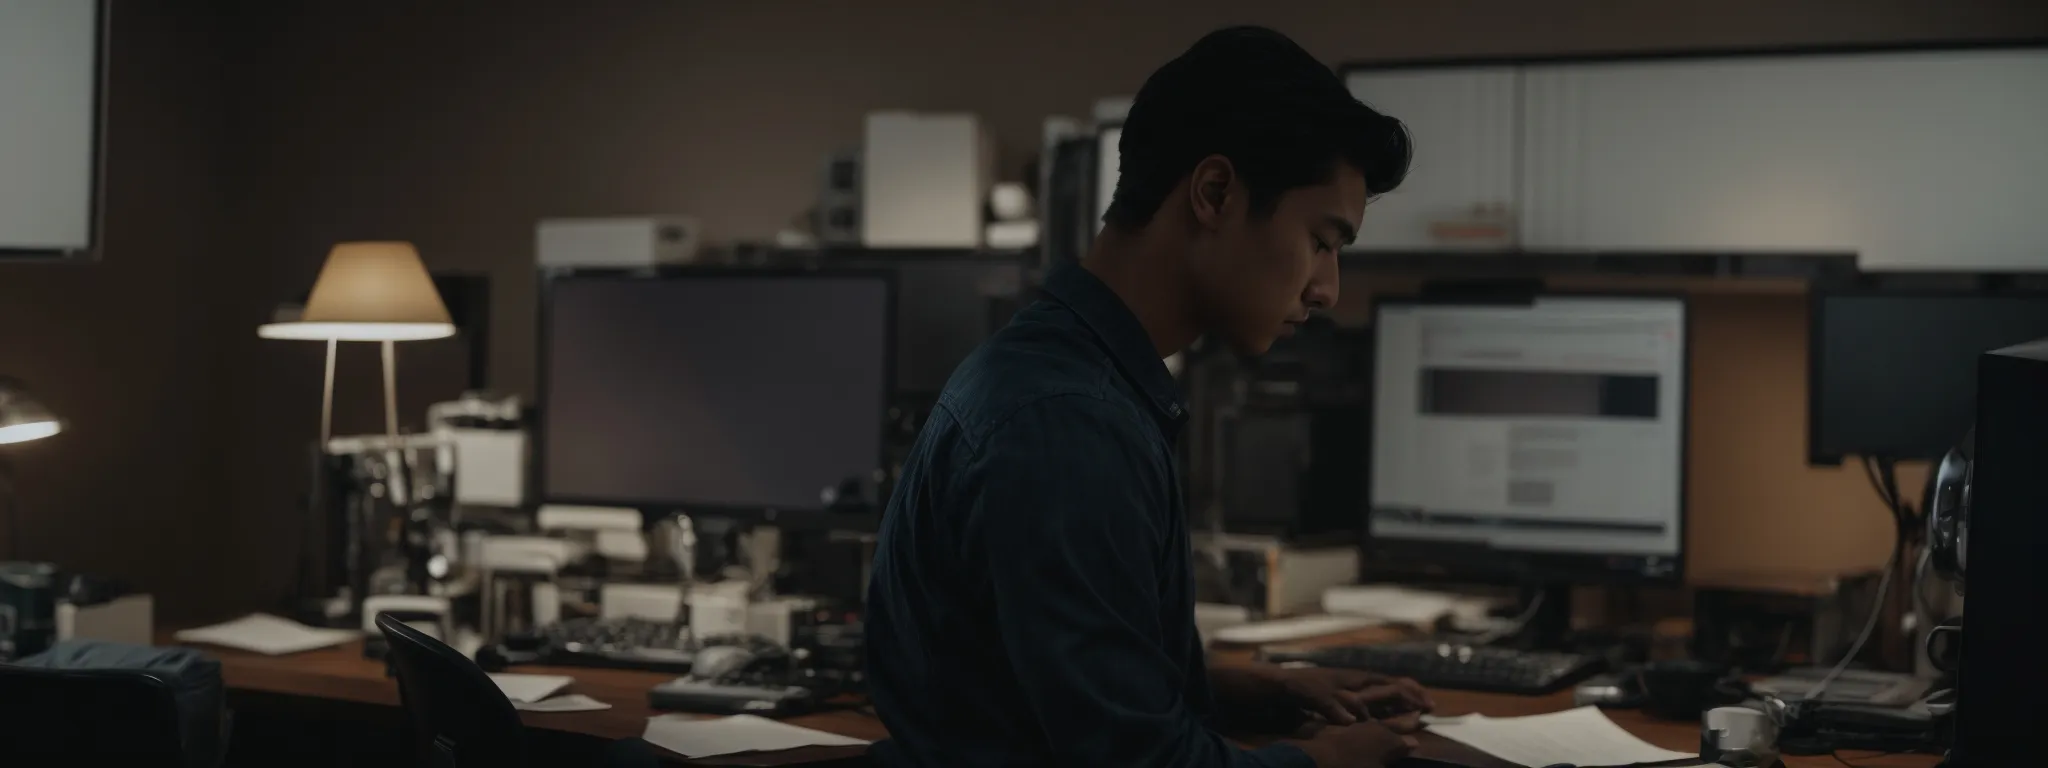 a focused individual working intently on a computer in a serene, clutter-free office space.